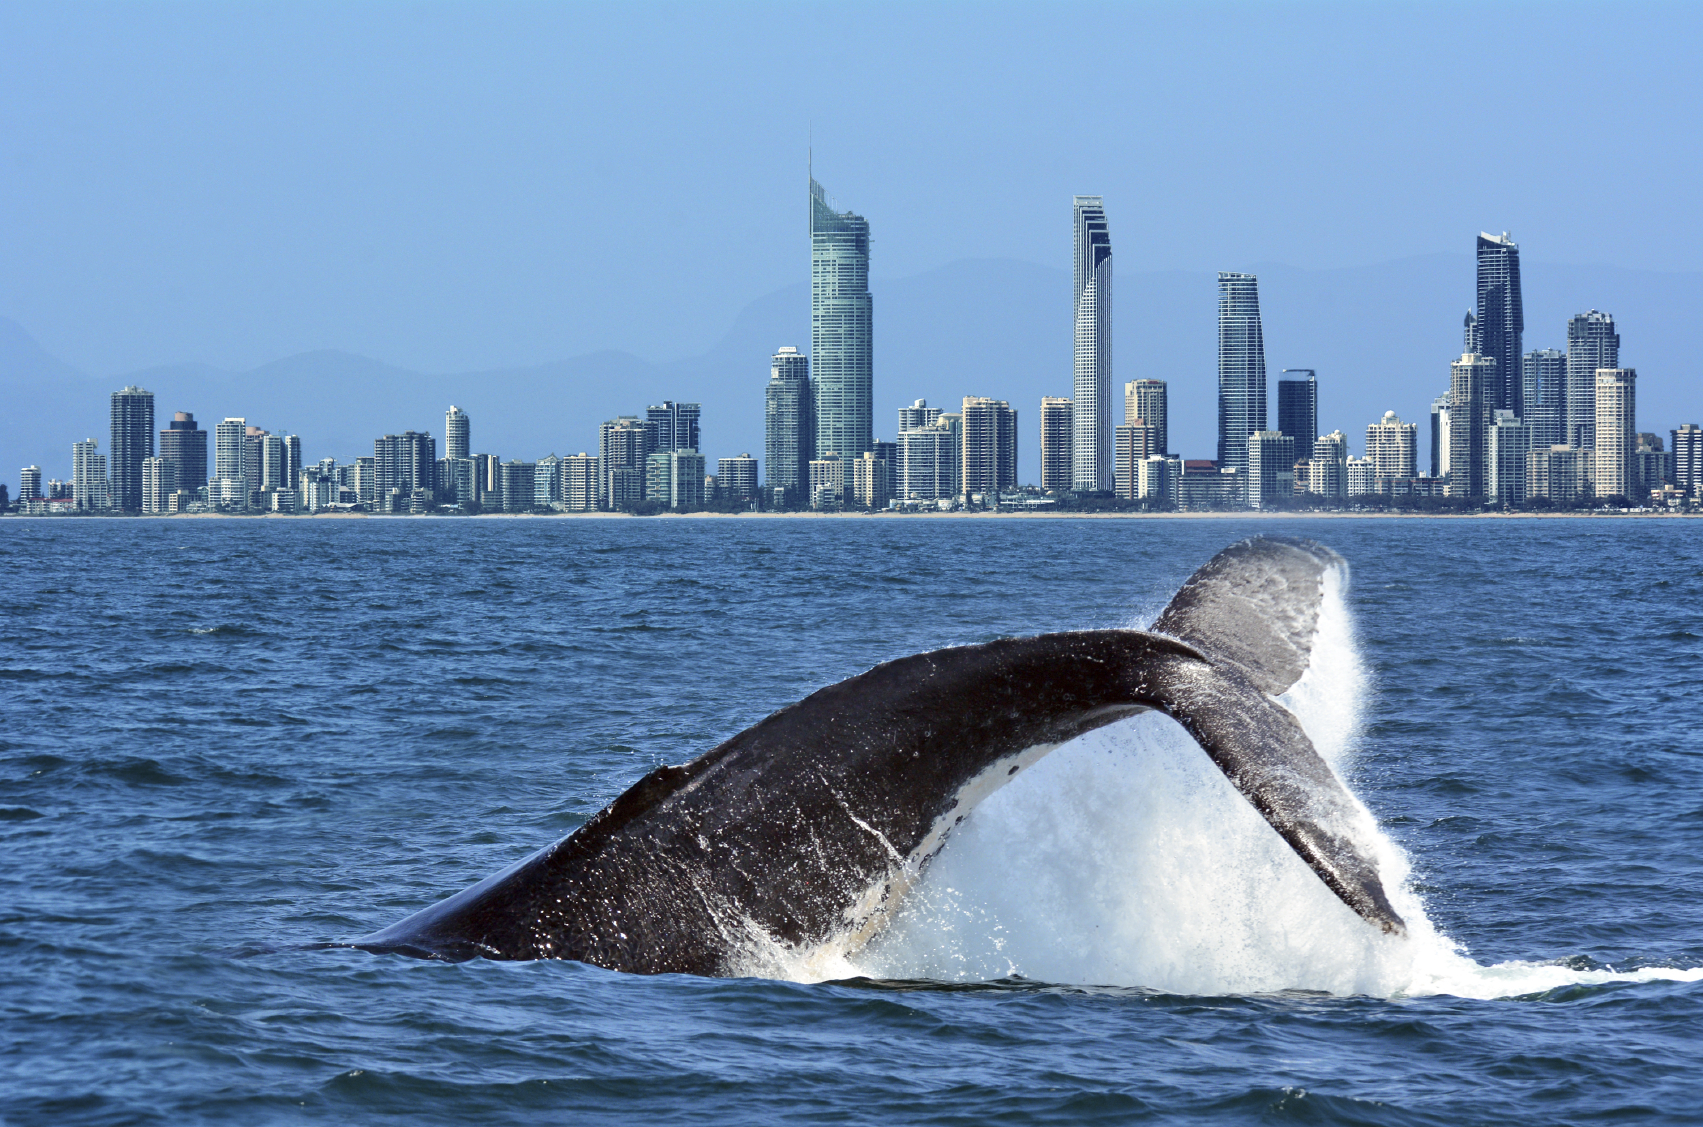 Whale Watching in Australia, a Travel Guide